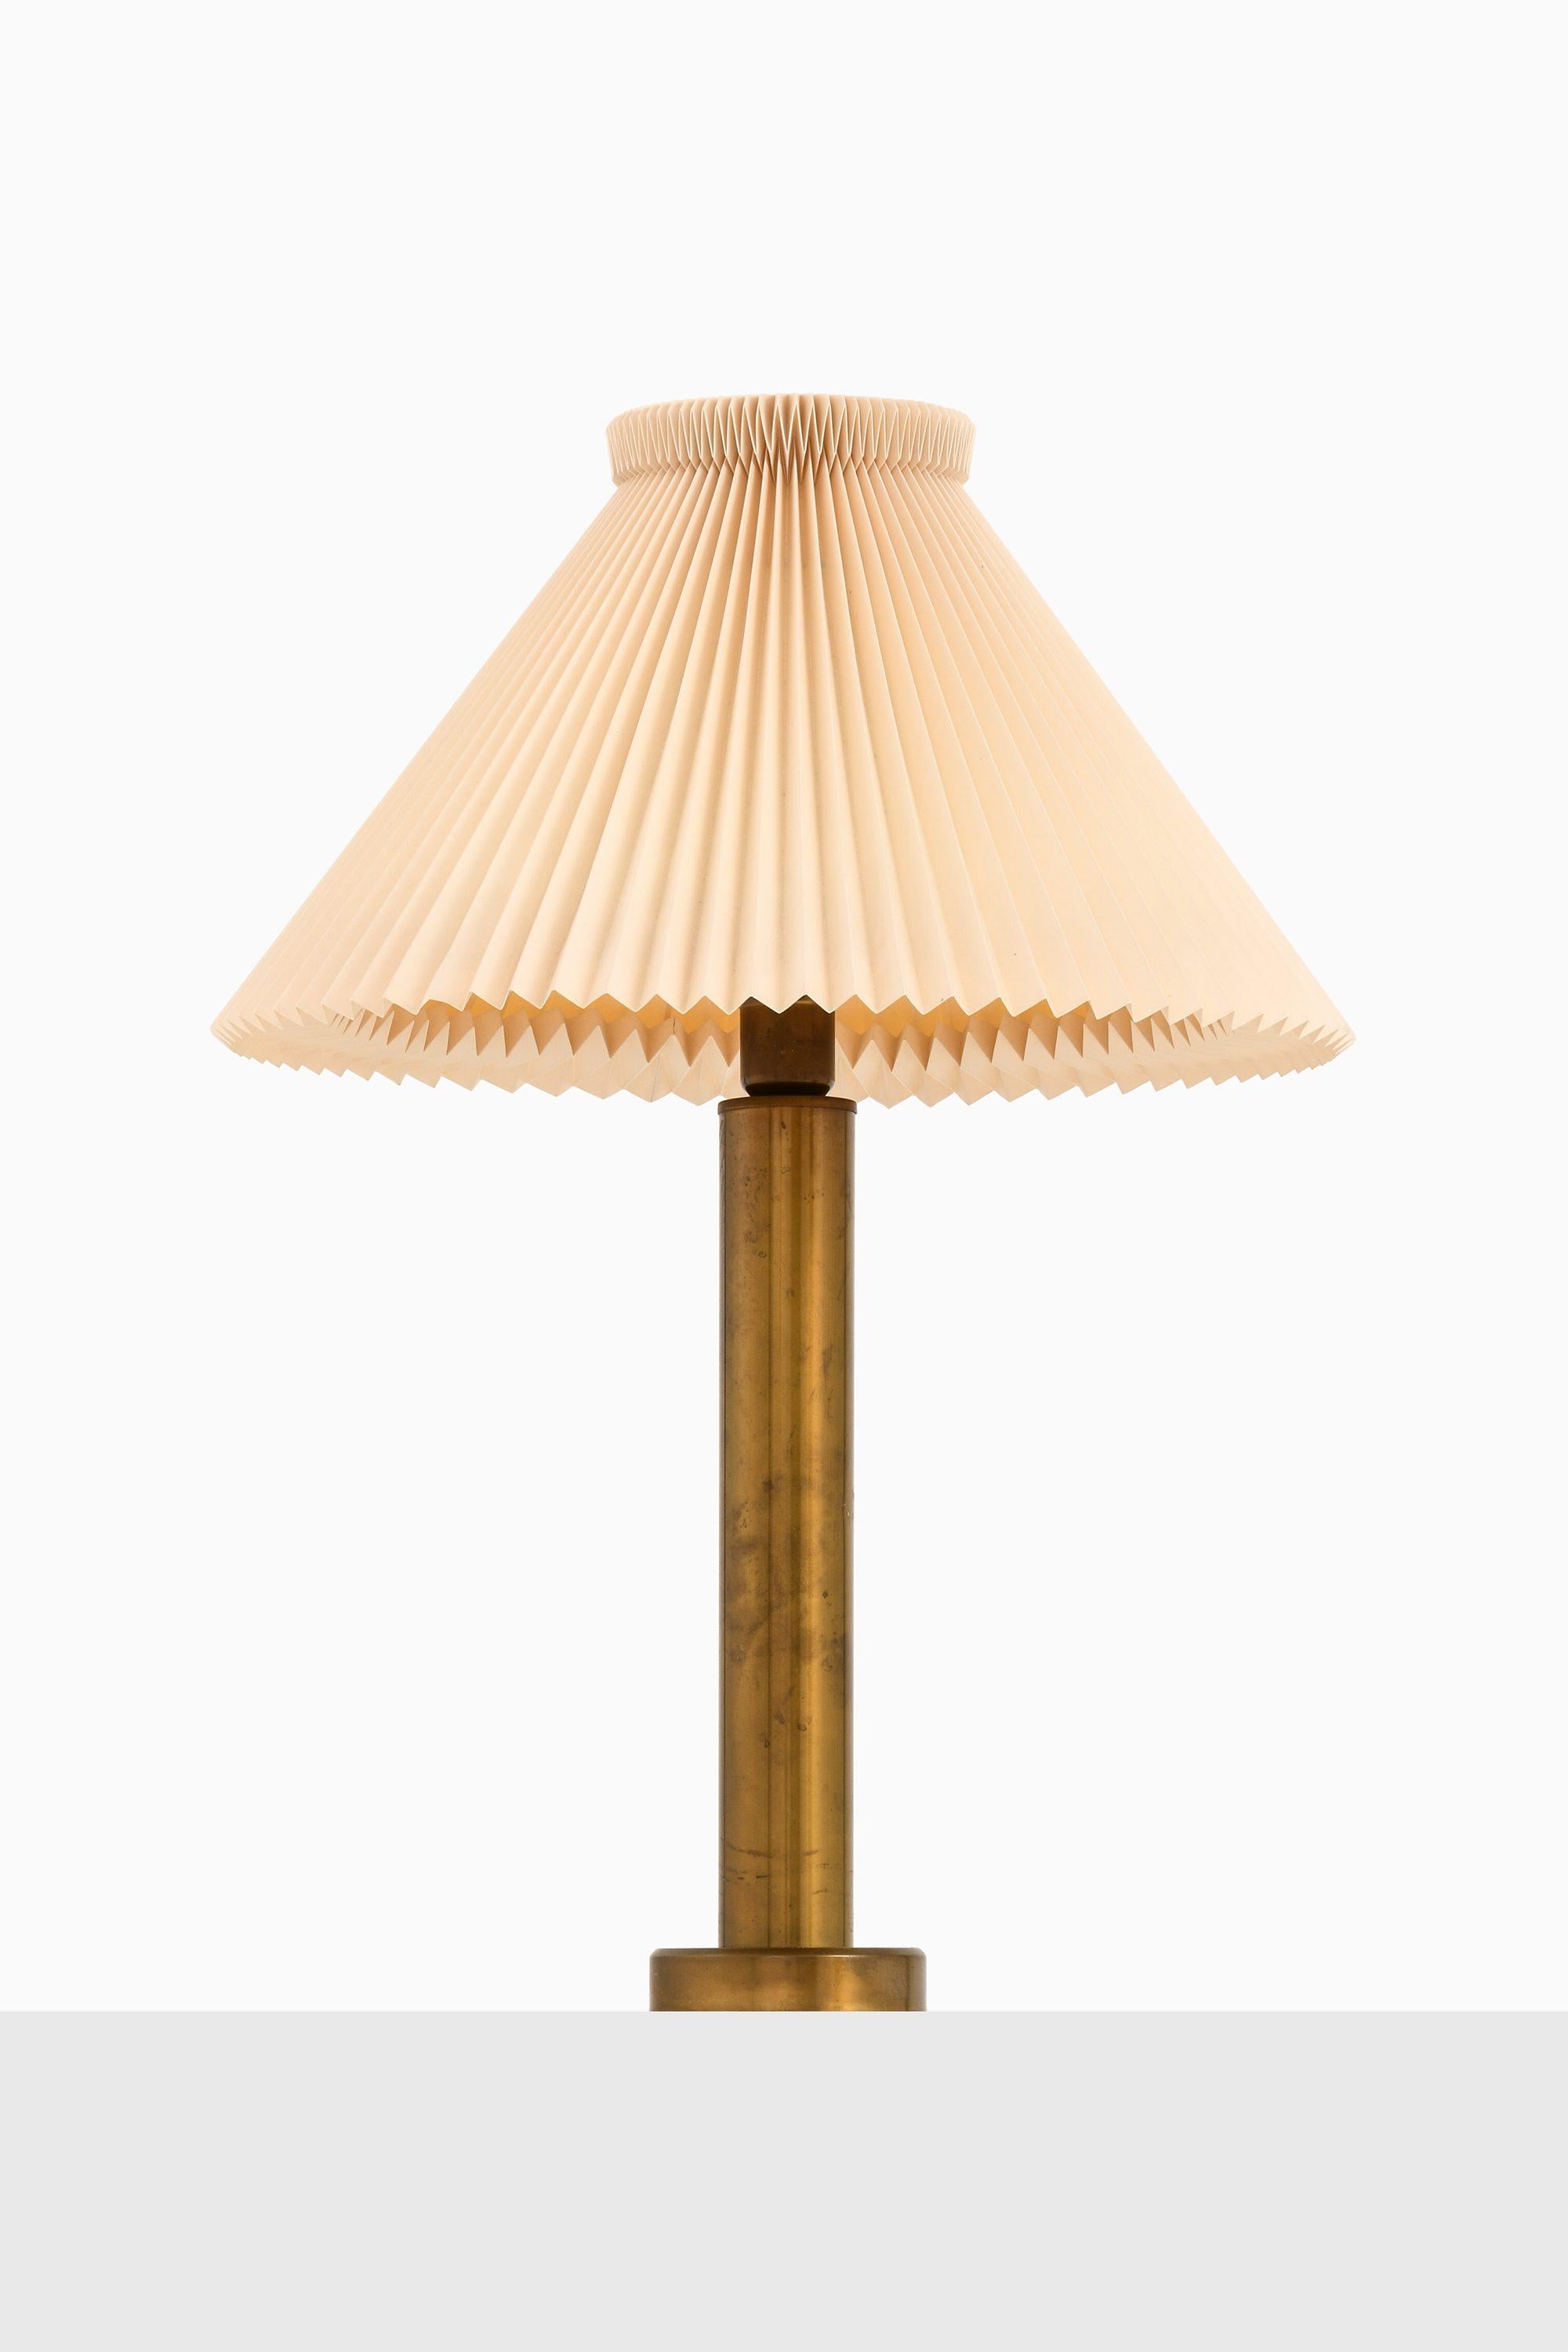 Pair of Table Lamps in Brass, 1950’s For Sale